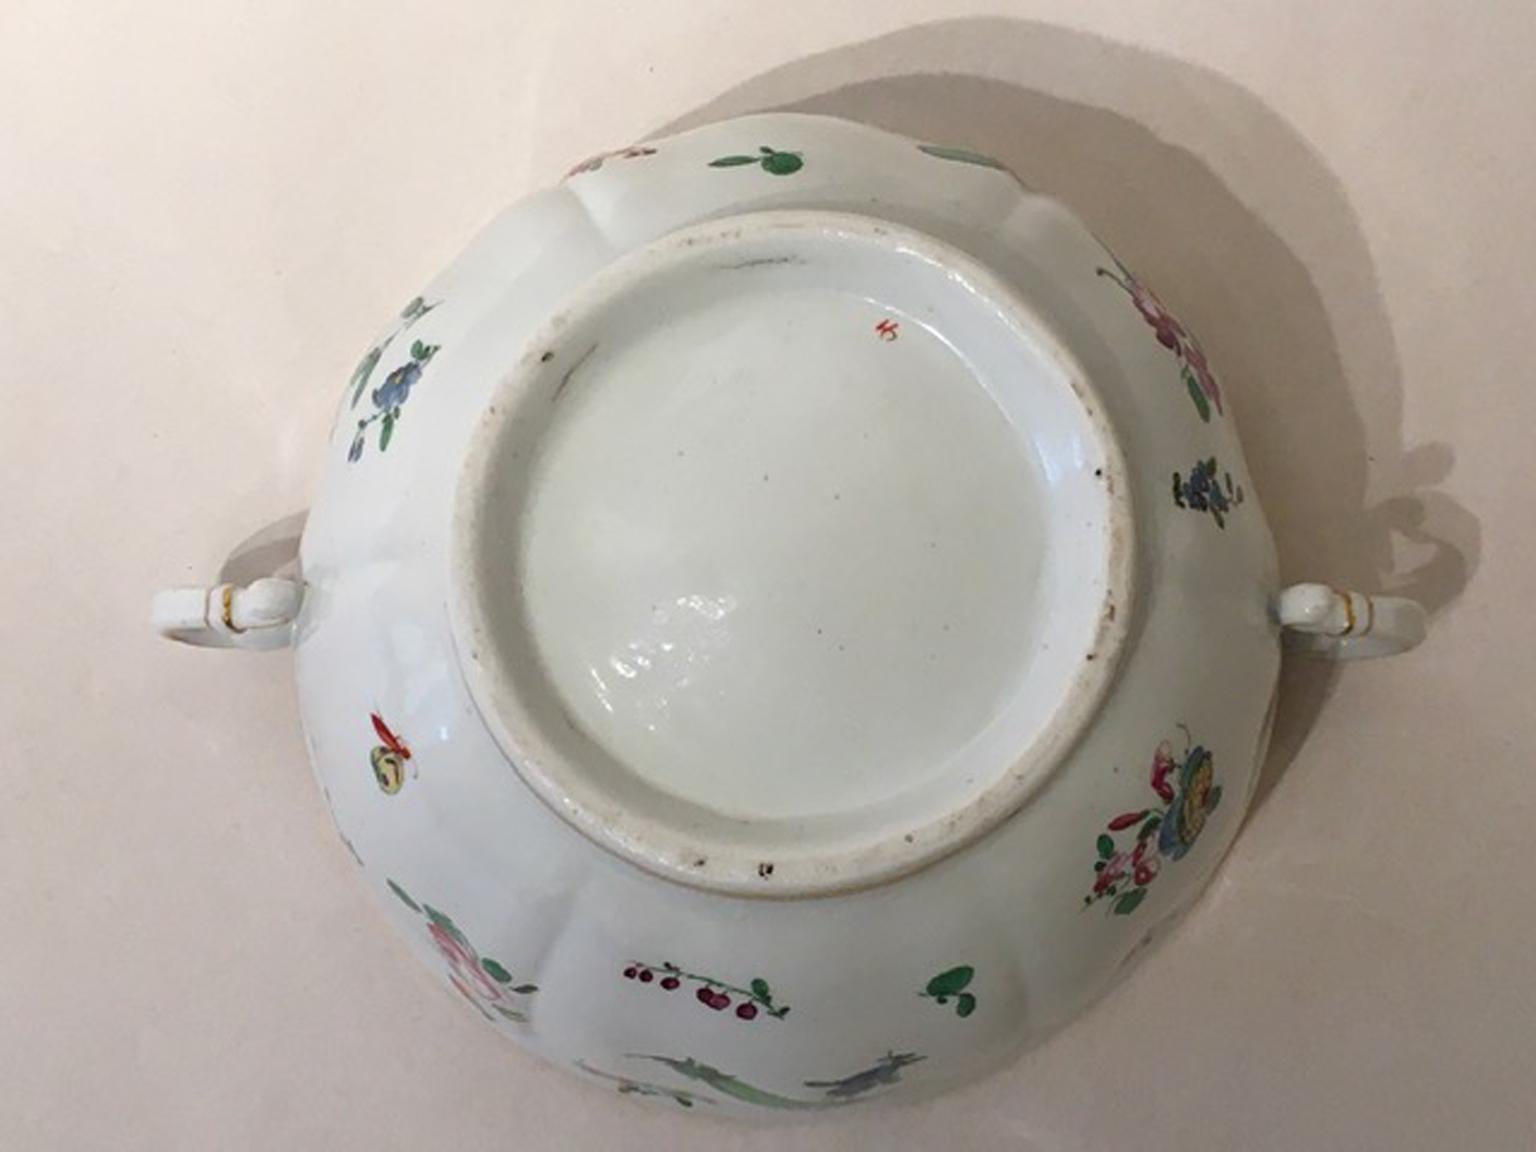 Italy Richard Ginori Mid-19th Century Porcelain Covered For Sale 8